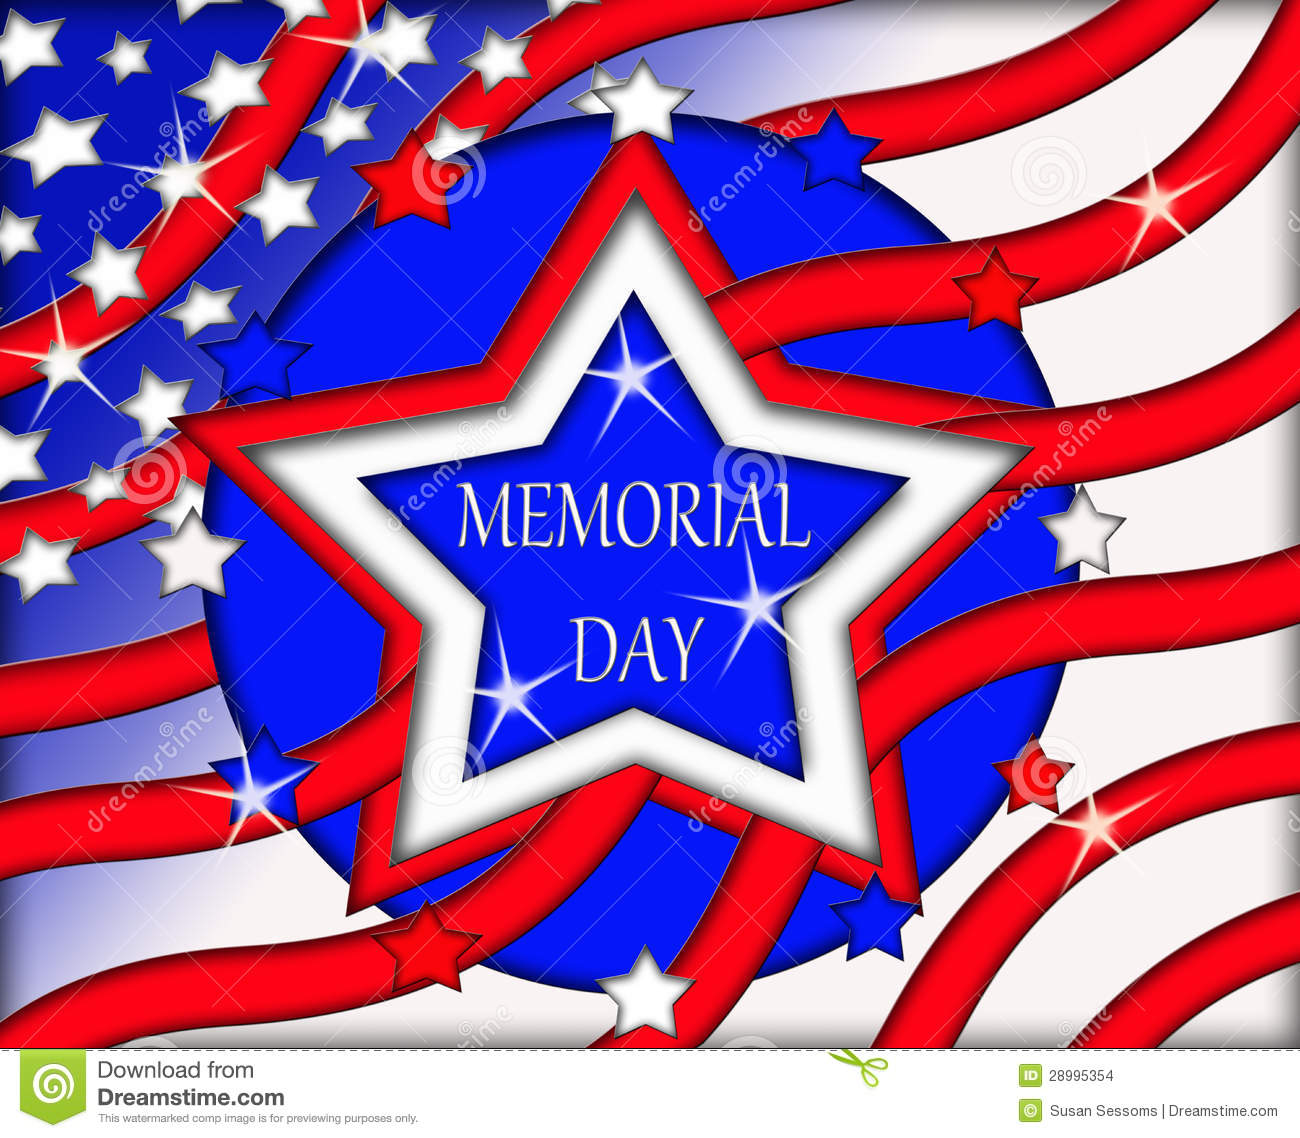 Red White And Blue Stars With Memorial Day Wording In Center Of Star